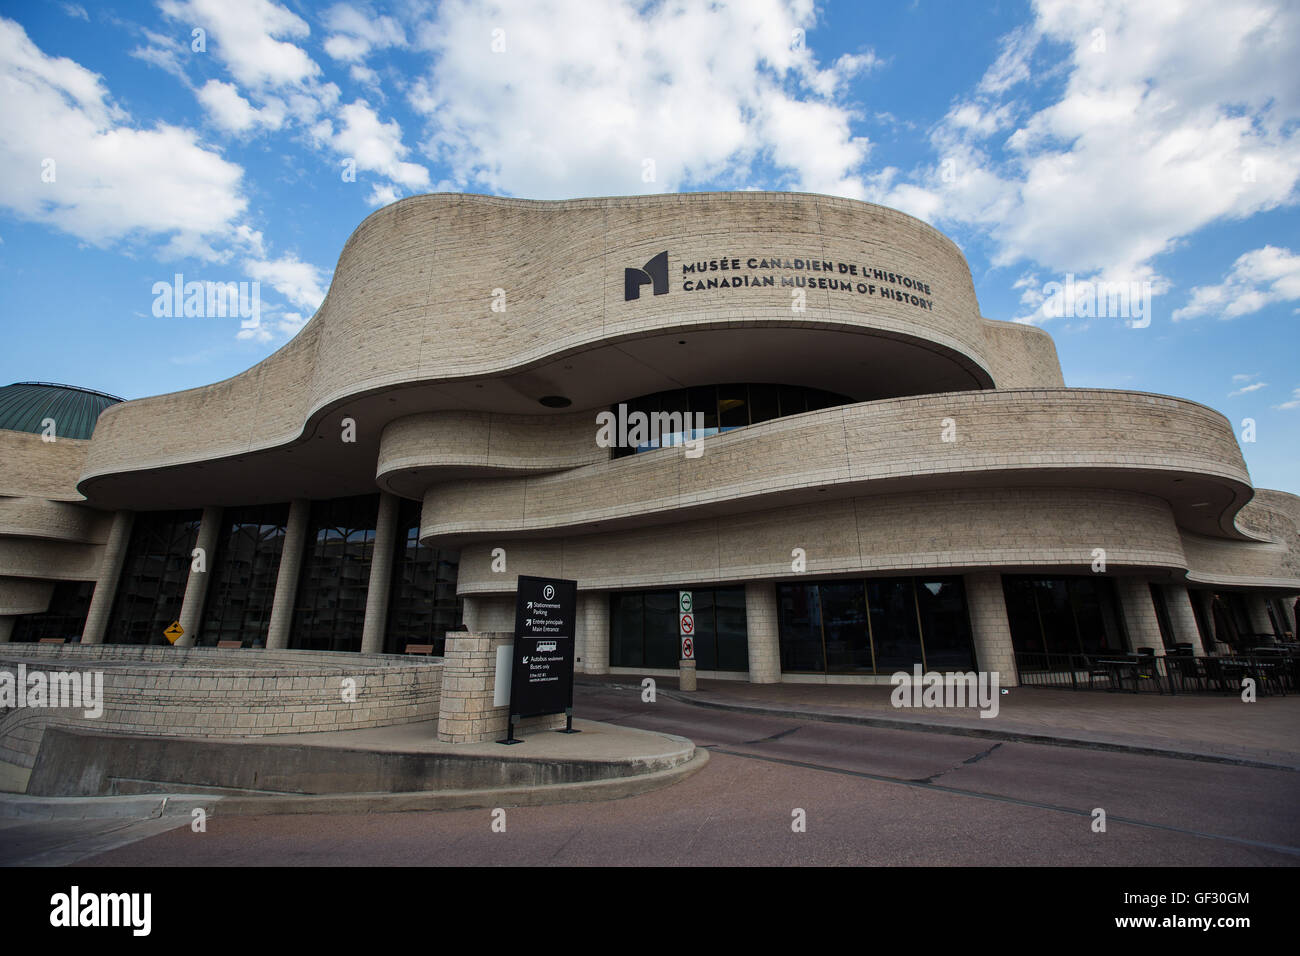 The front entrance of the Museum of Civilization in Gatineau, Que., on July 14, 2016. Stock Photo